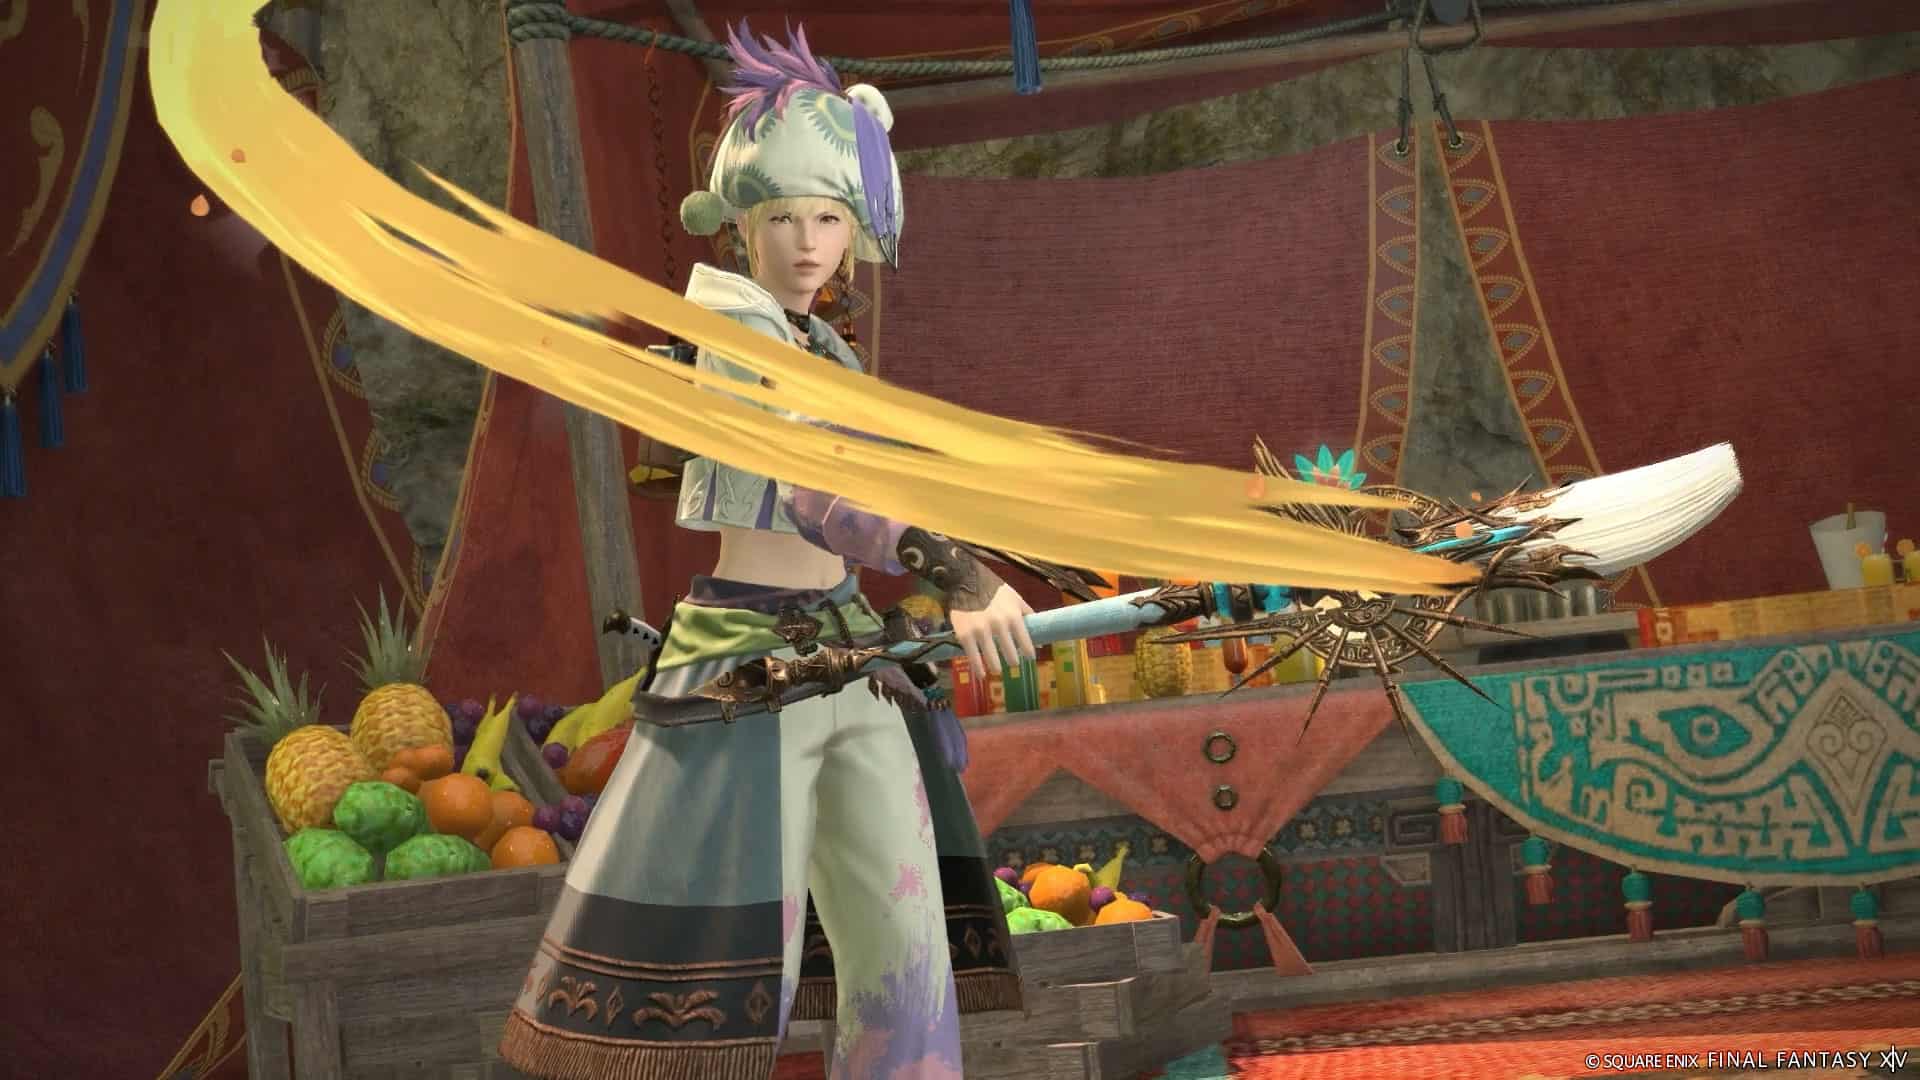 A character in vibrant attire wields a long weapon with a yellow, swooshing effect. They stand in front of a market stall filled with various fruits and colorful fabrics, reminiscent of the lively aesthetics seen in Final Fantasy 14 Dawntrail's early access release.